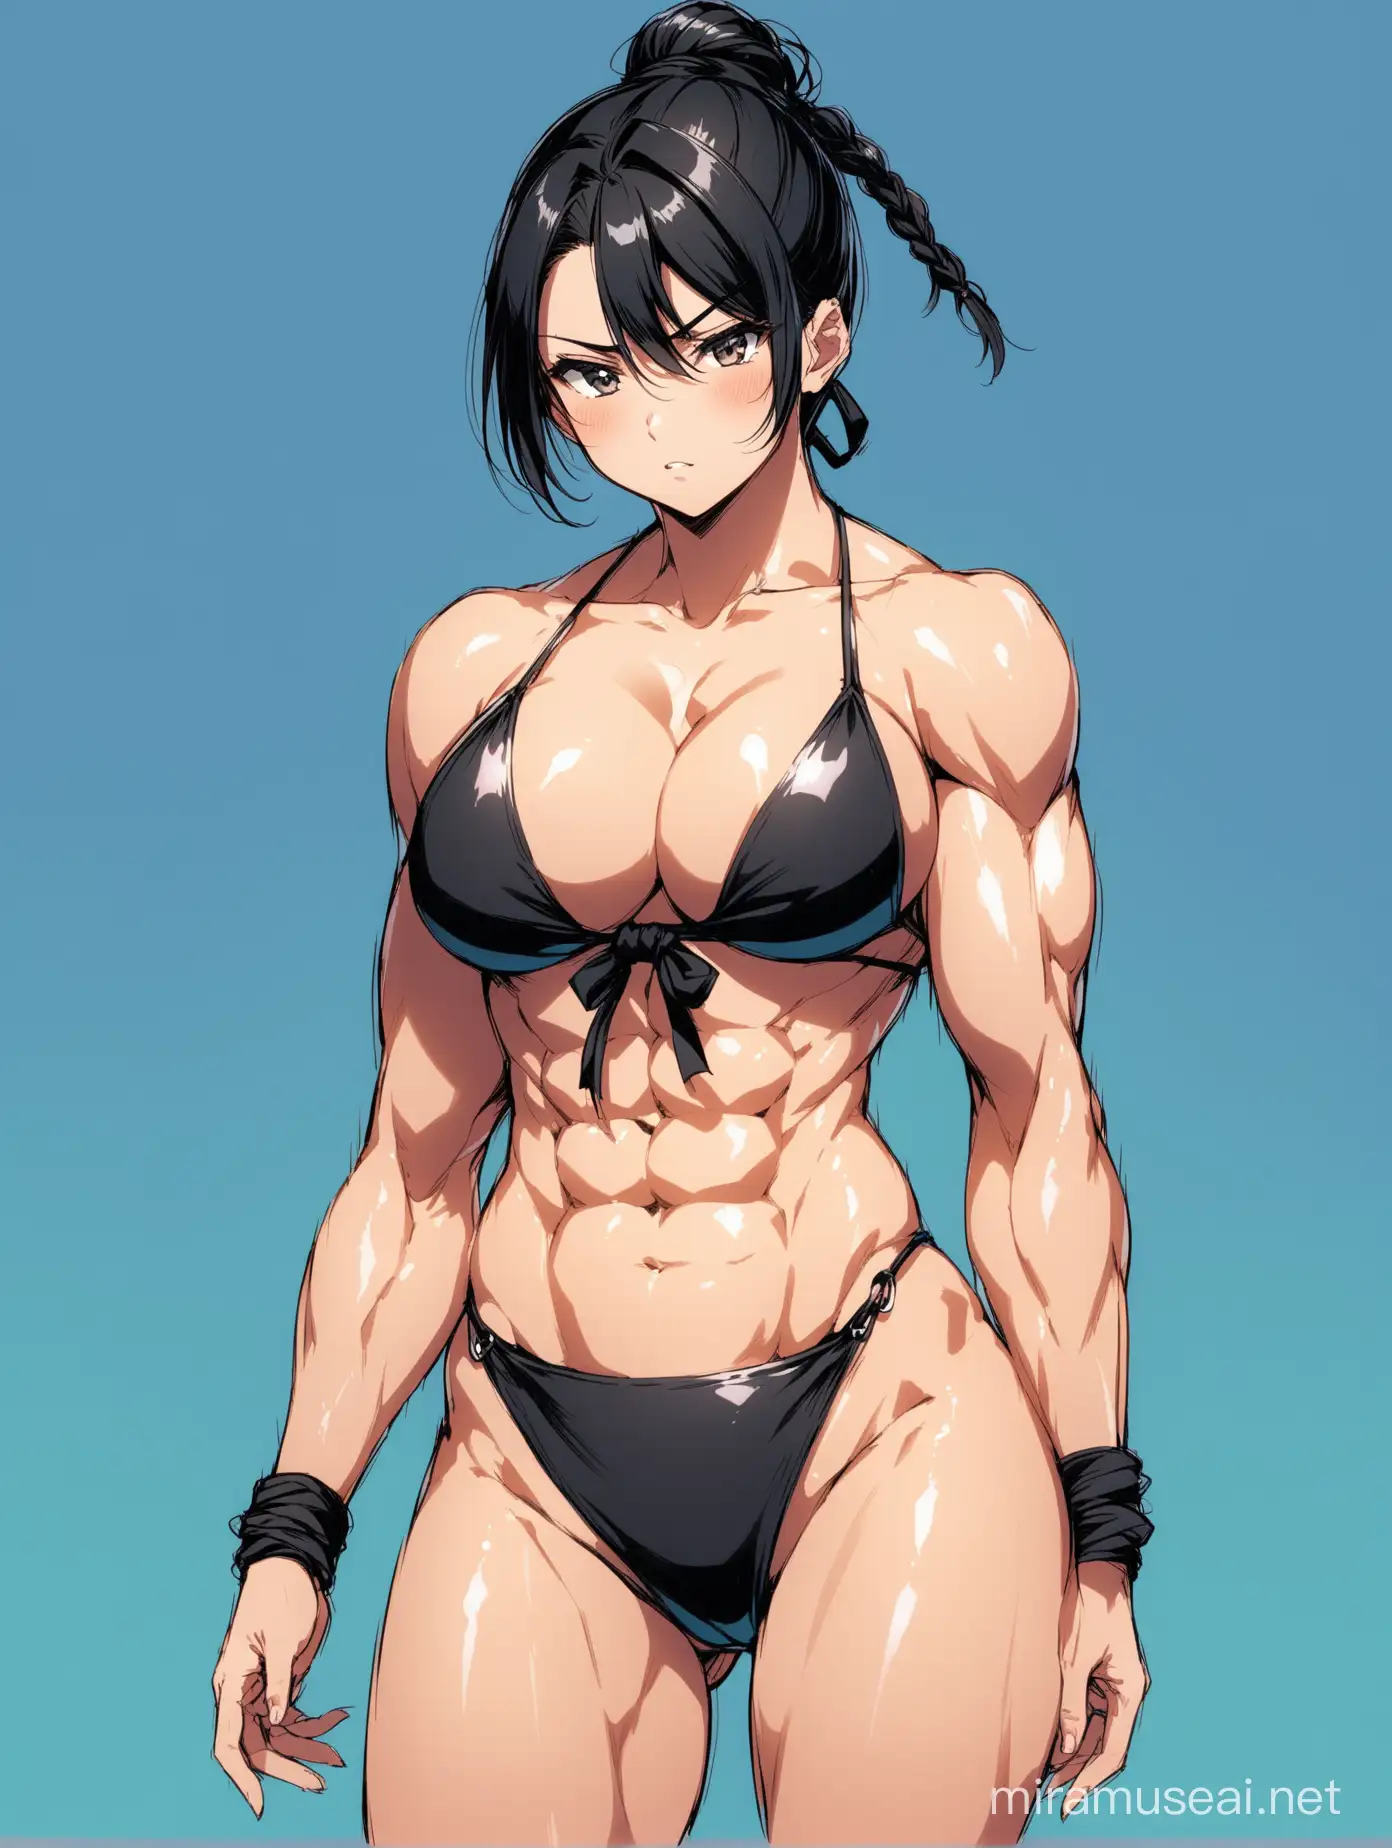 A woman with anime-style black hair tied up , dressed in a swimsuit exposing her muscular body 